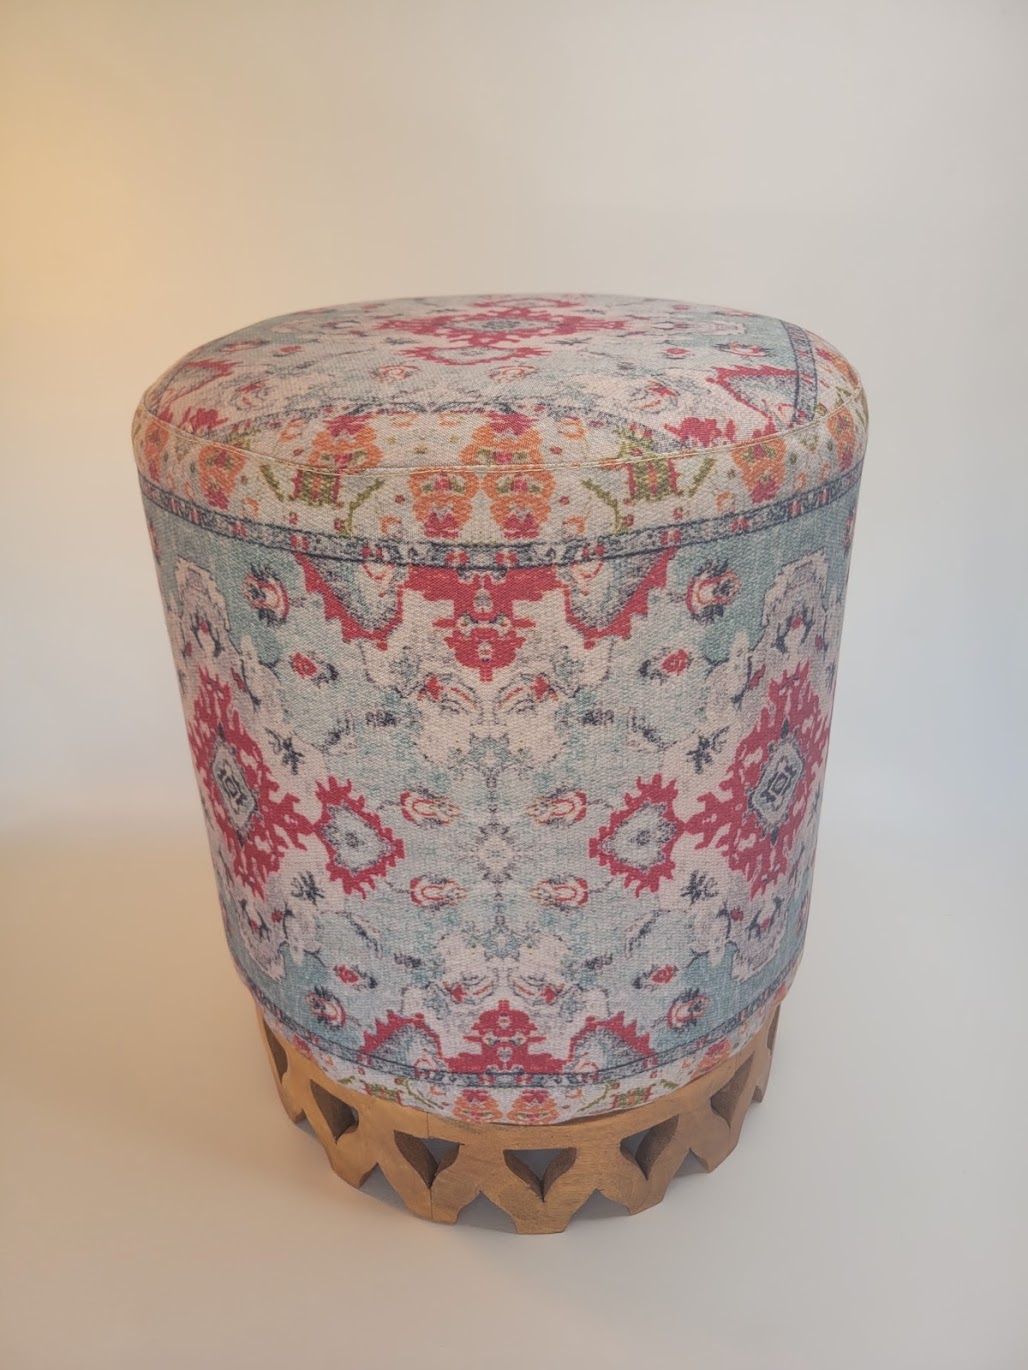 Tall Blue and Pink Stool